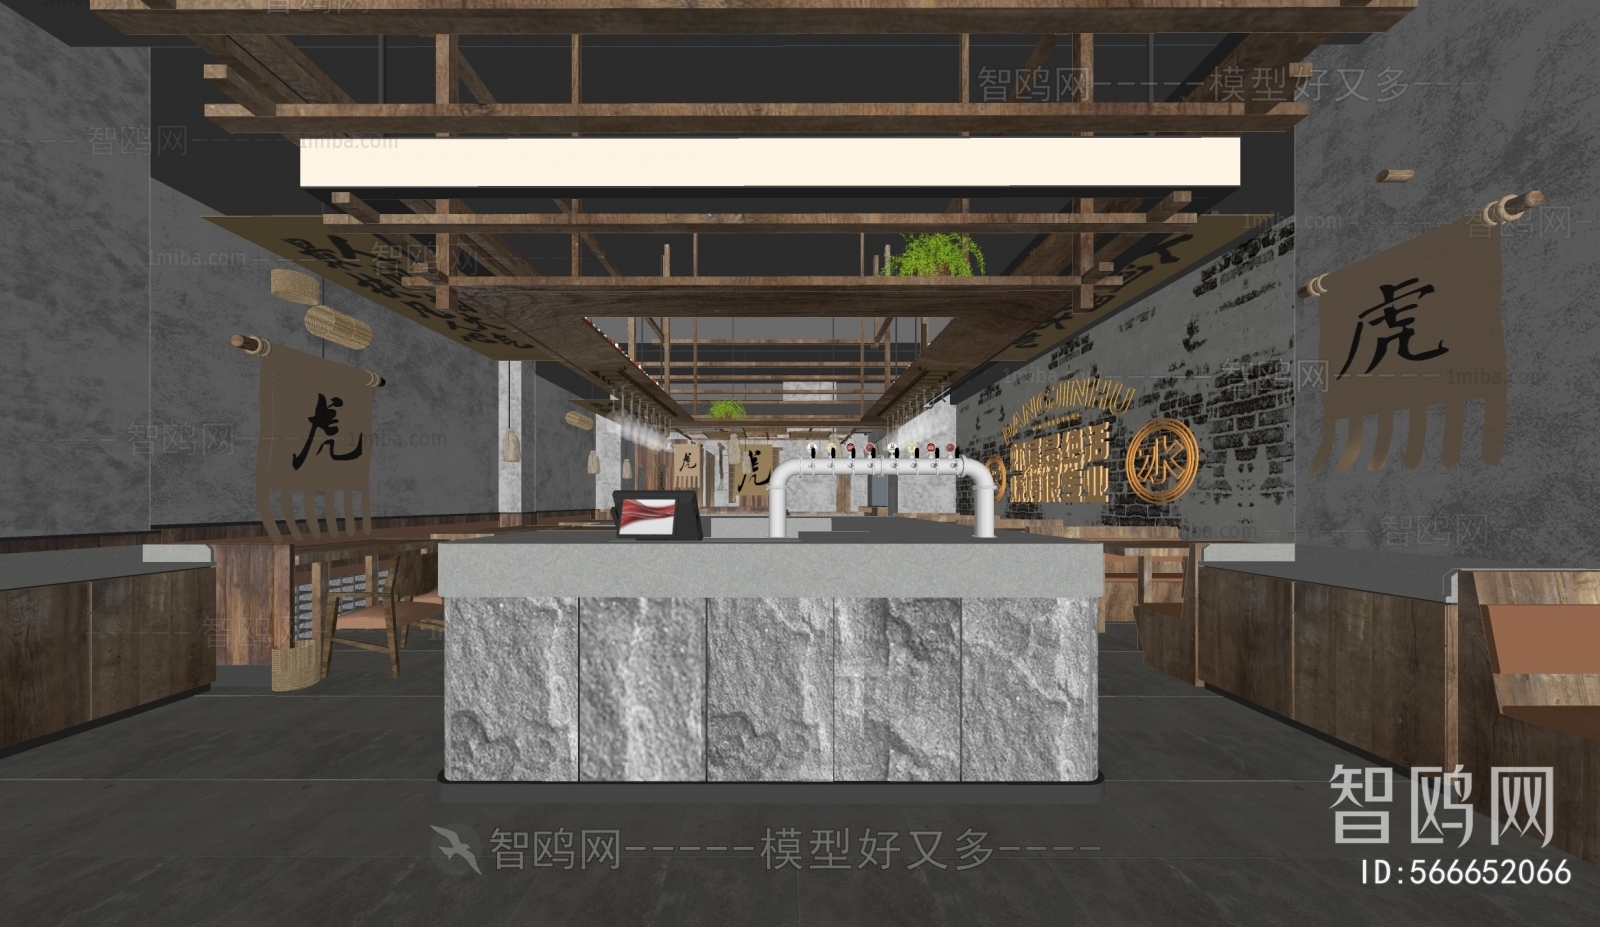 Industrial Style Barbecue Restaurant